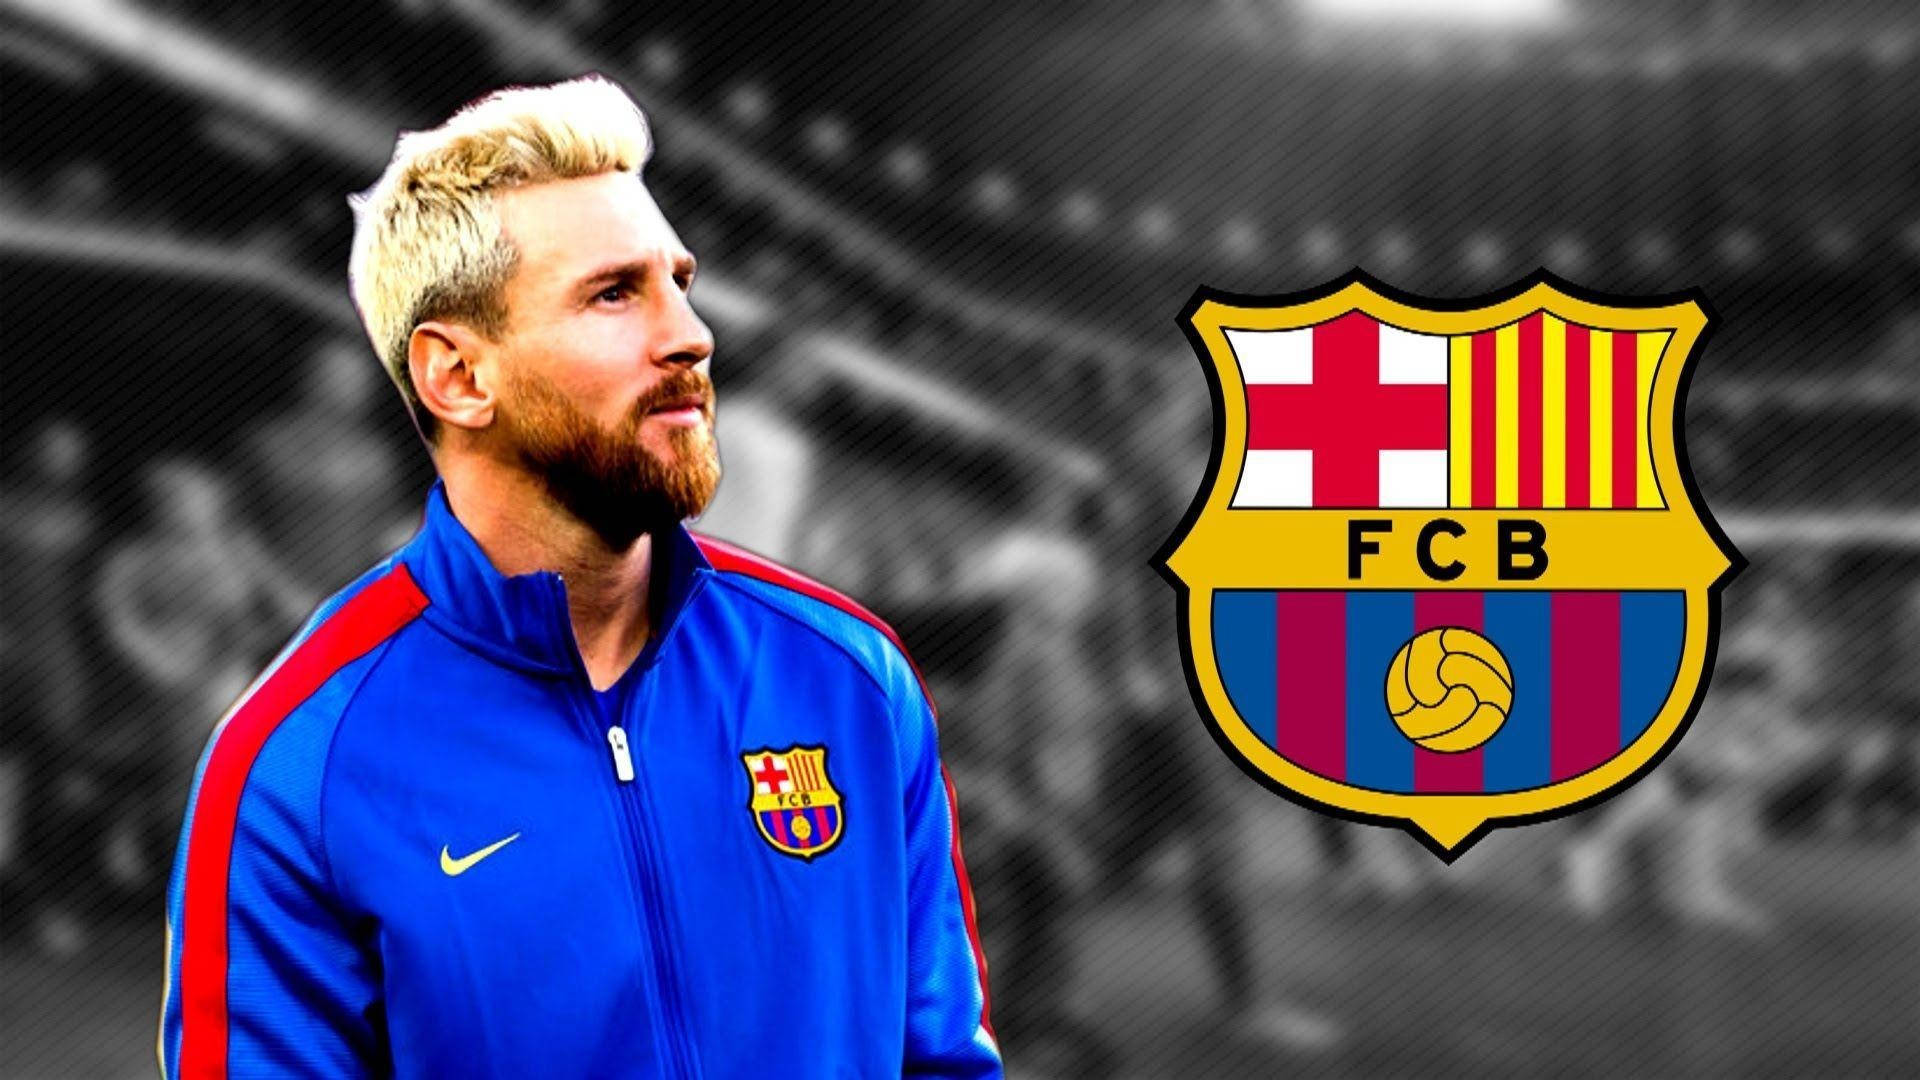 1920X1080 Messi Wallpaper and Background